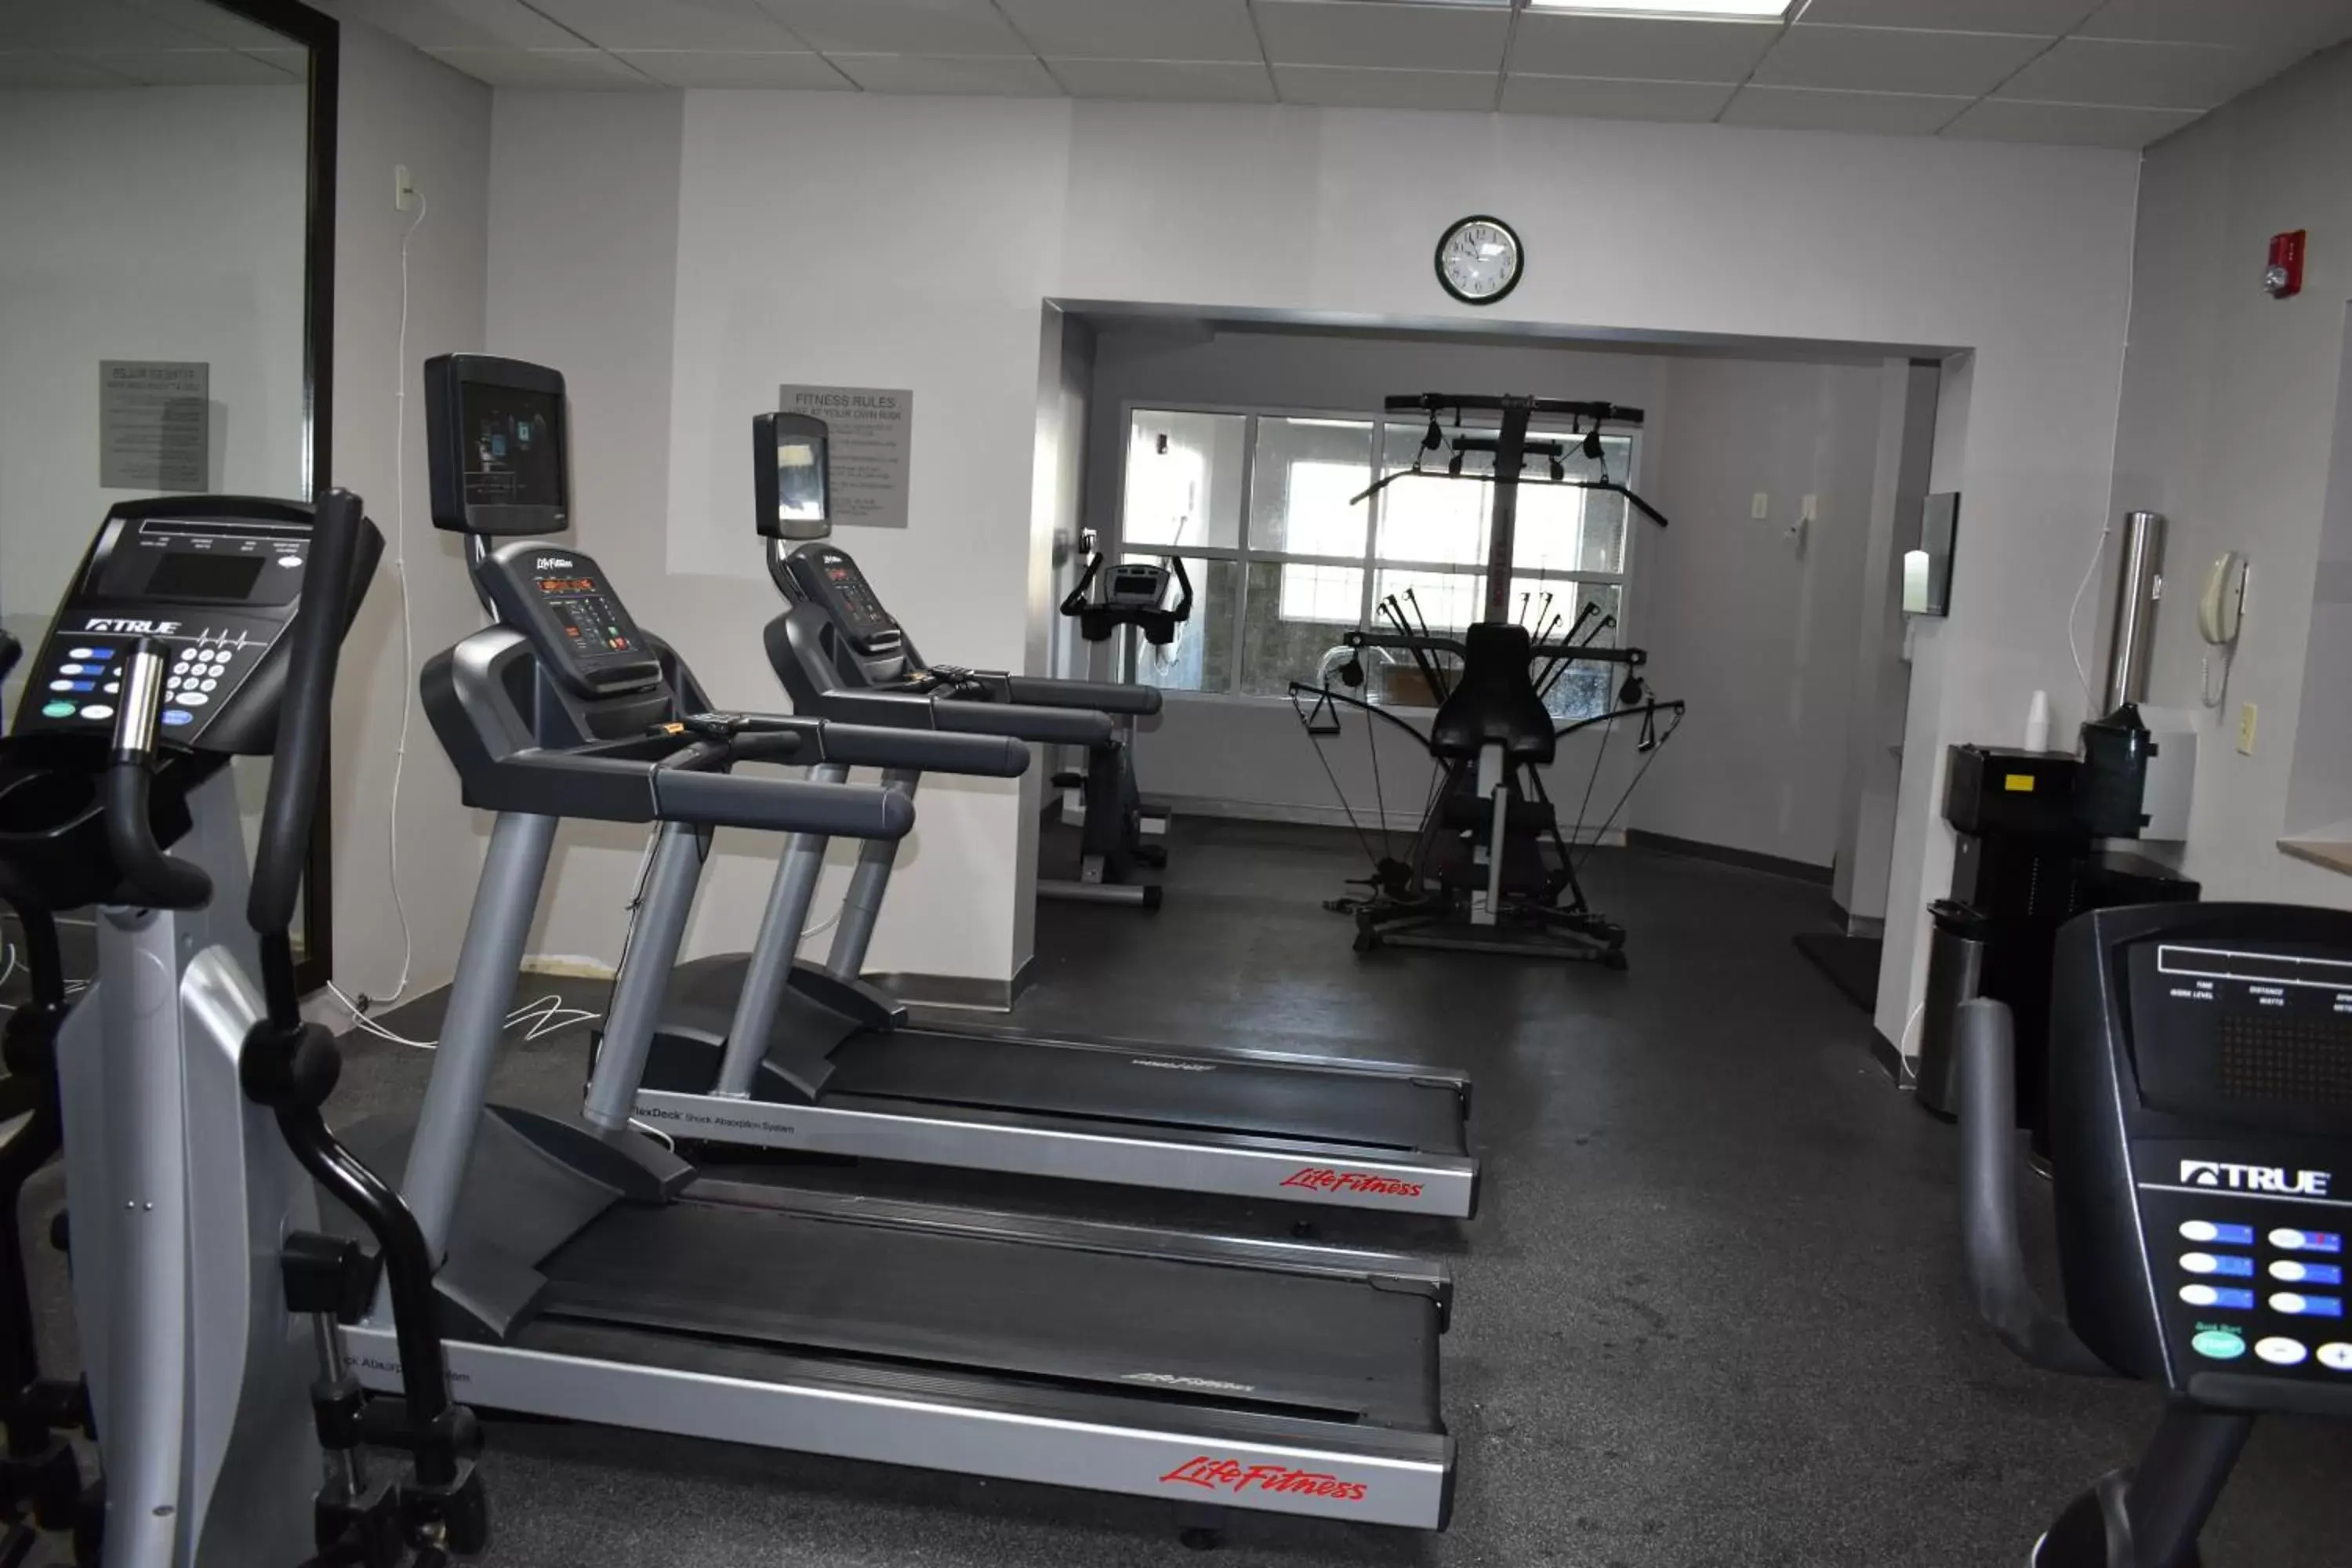 Fitness centre/facilities, Fitness Center/Facilities in Country Inn & Suites by Radisson, Hagerstown, MD